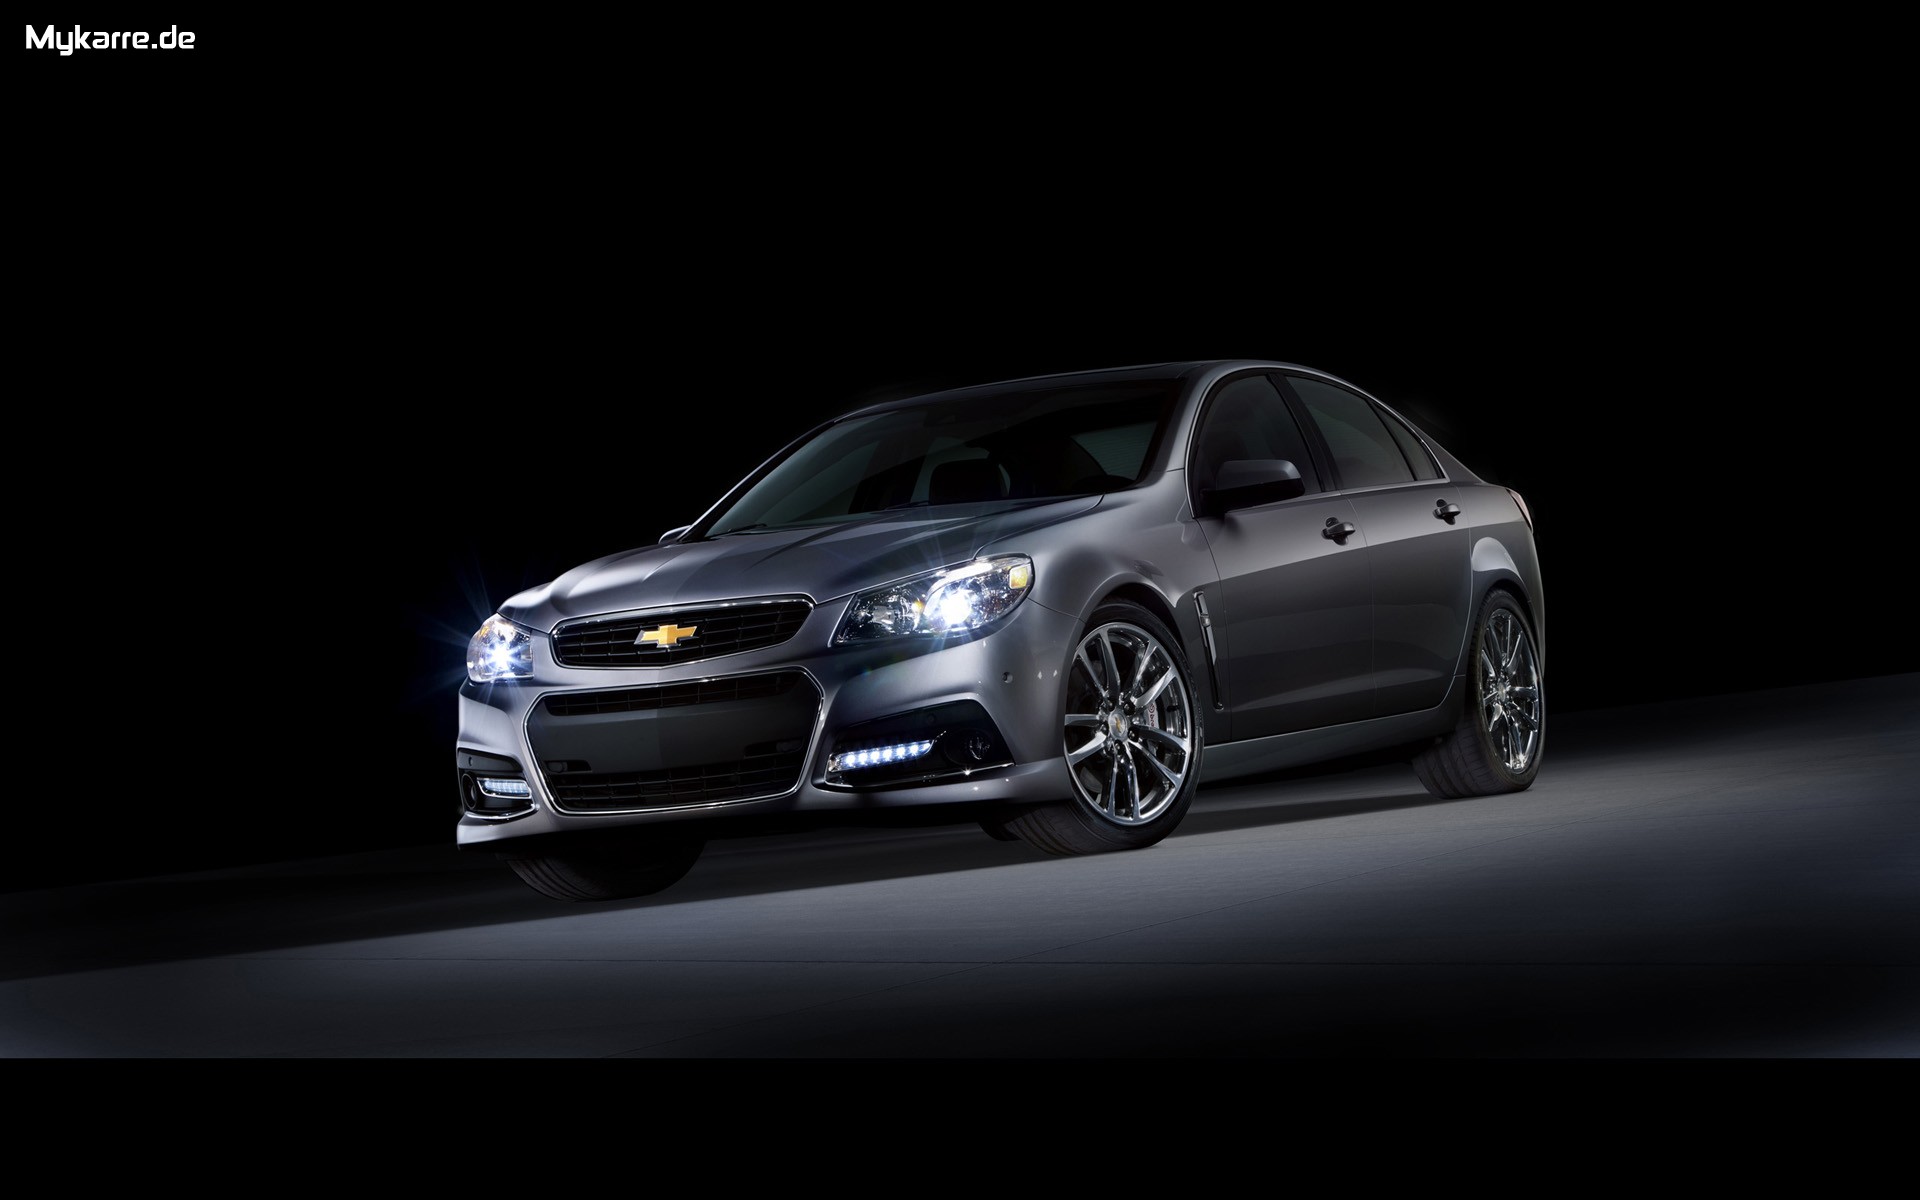 Chevrolet SS Wallpaper Frontansicht Auto Tuning News Tuning